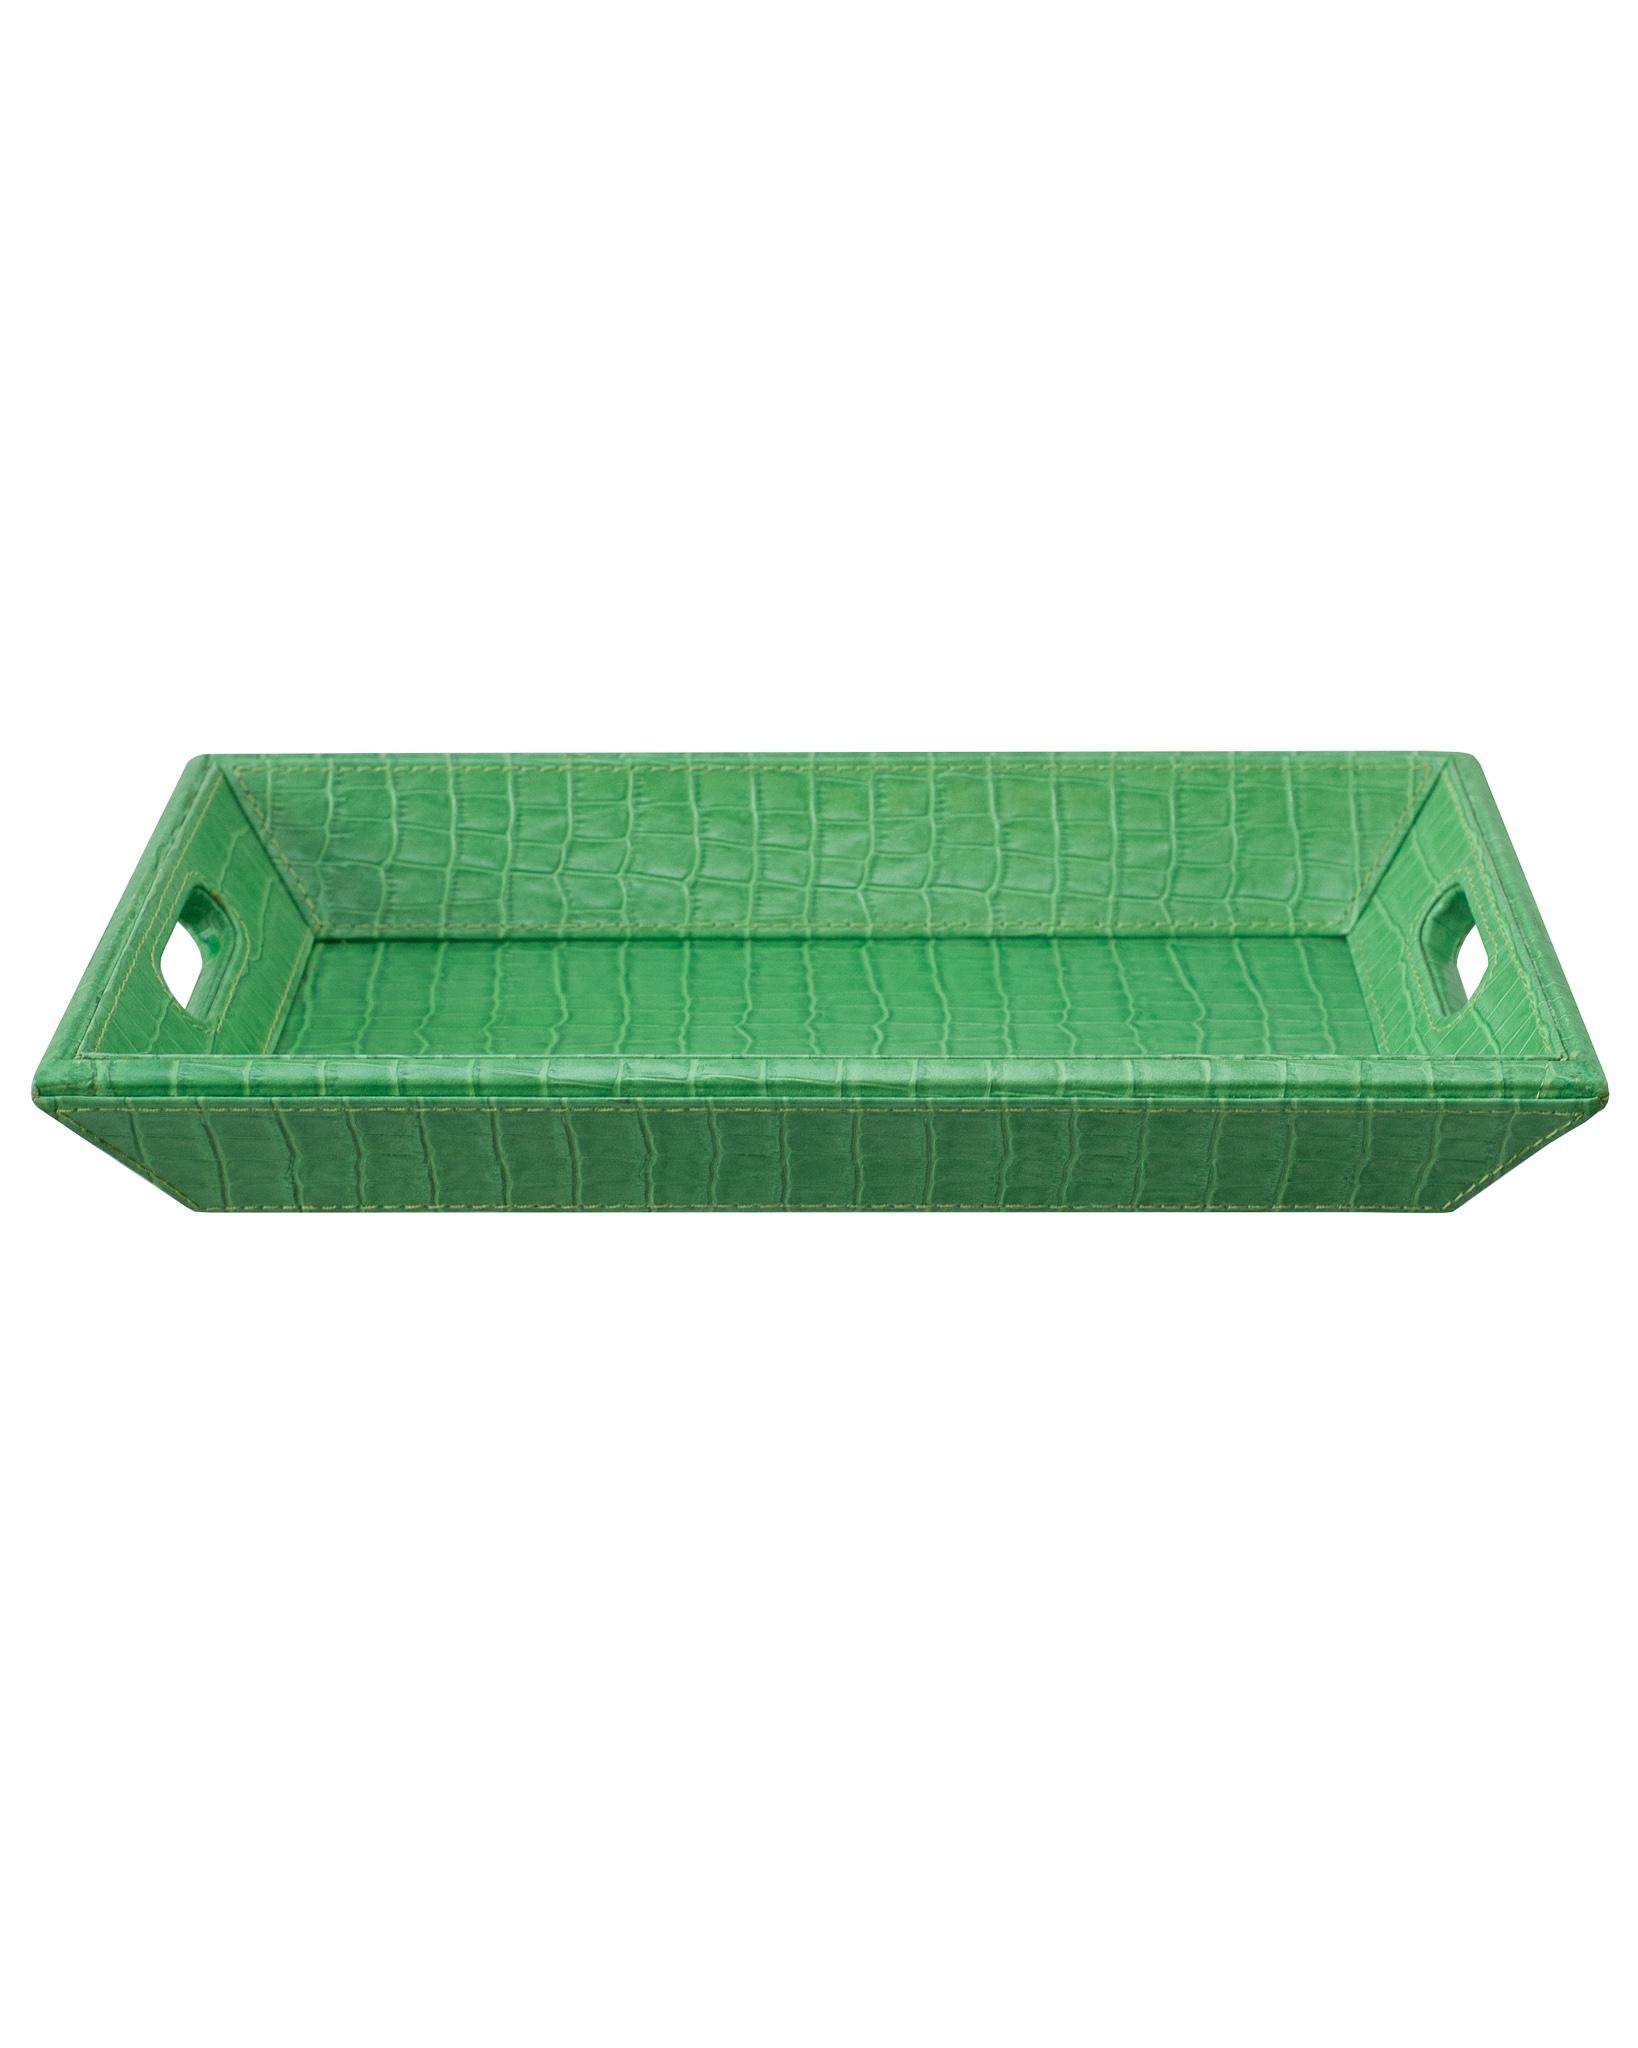 A beautiful bright green crocodile embossed leather tray, perfect for the desk, bedside table, or use as a serving piece. Fully wrapped in embossed leather with stitched panels, each tray has two openings for carrying.